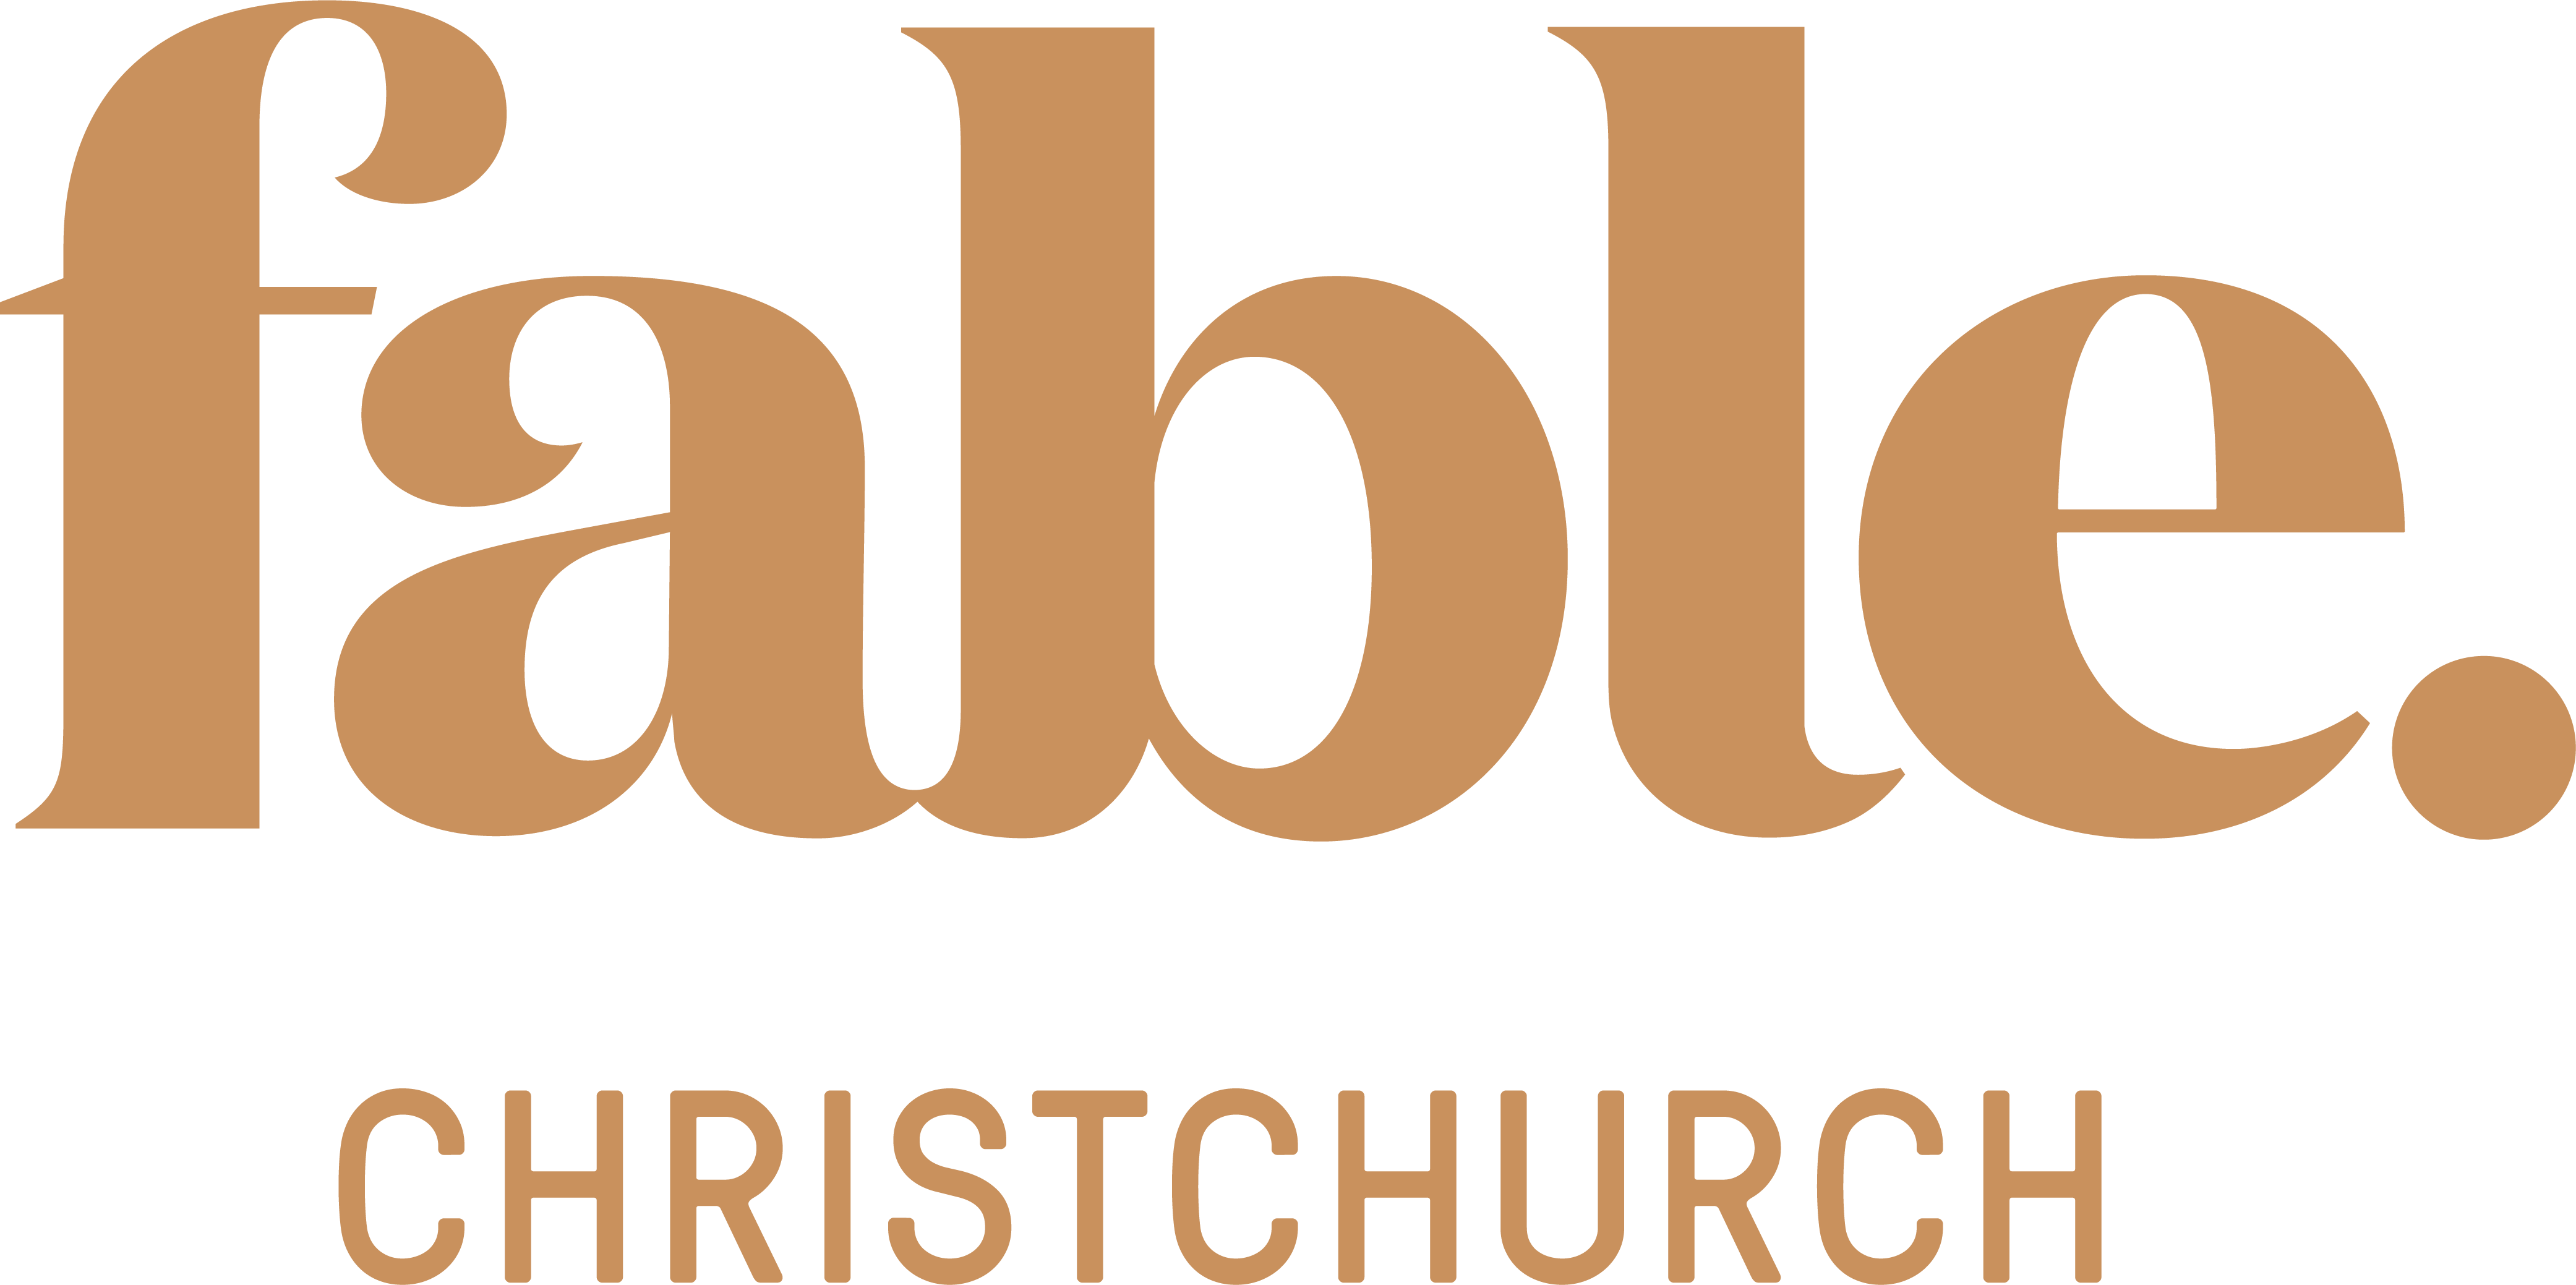 
Fable Christchurch